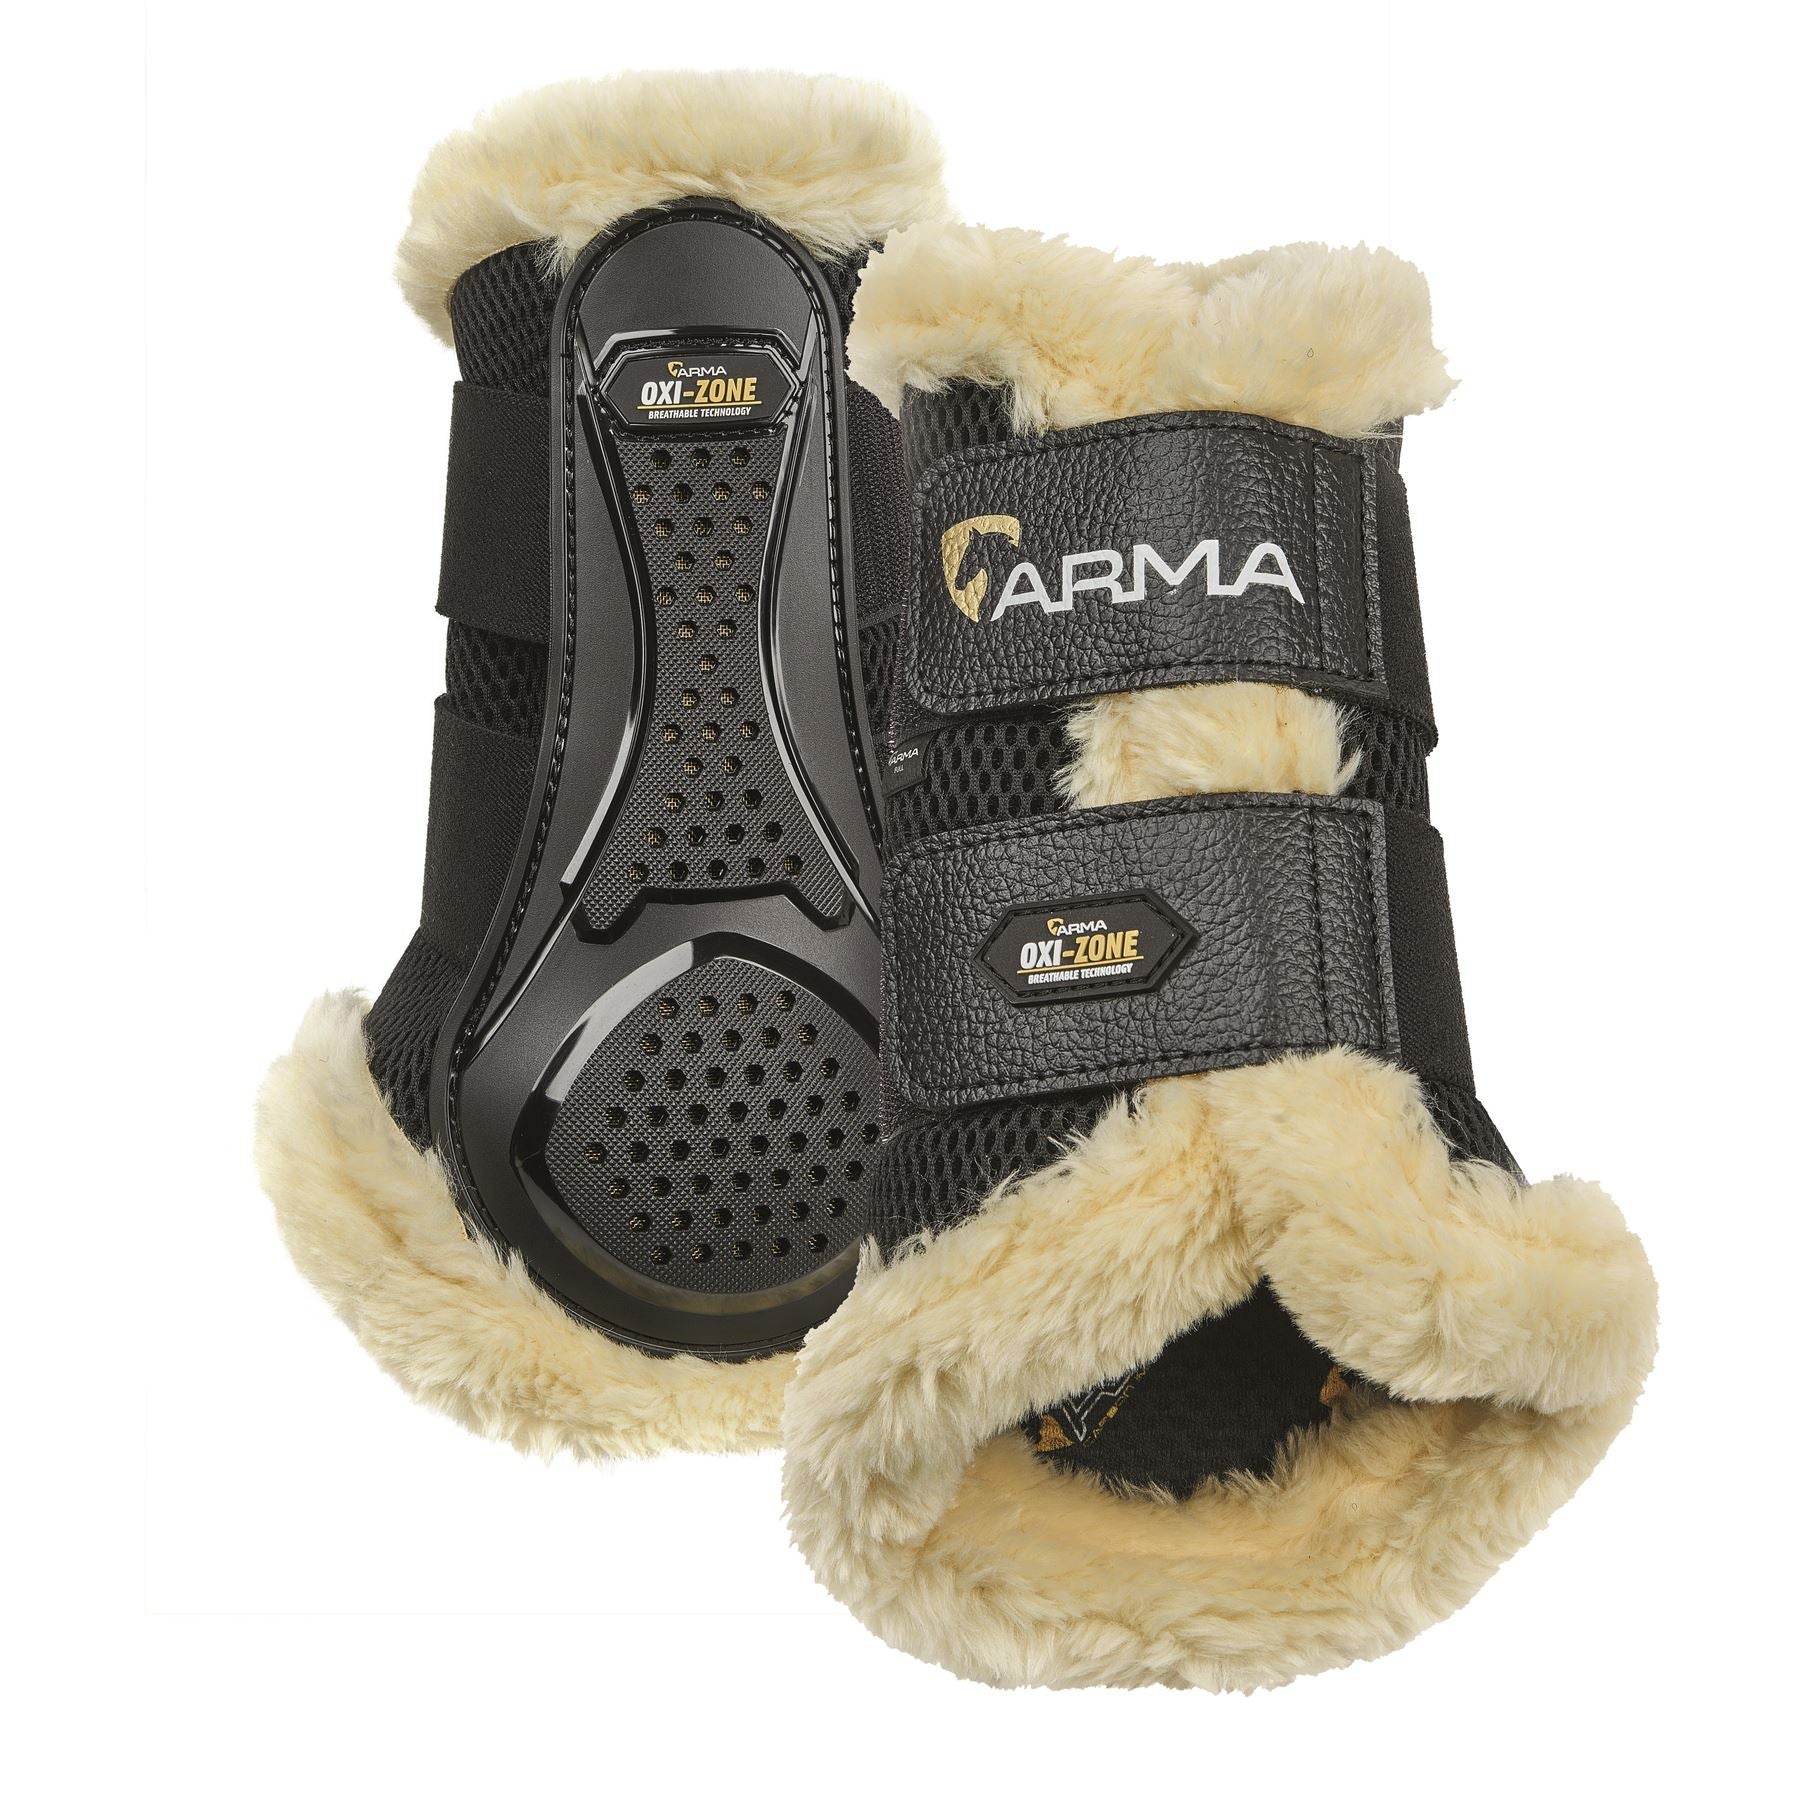 ARMA OXI-ZONE SupaFleece Brushing Boots - Just Horse Riders